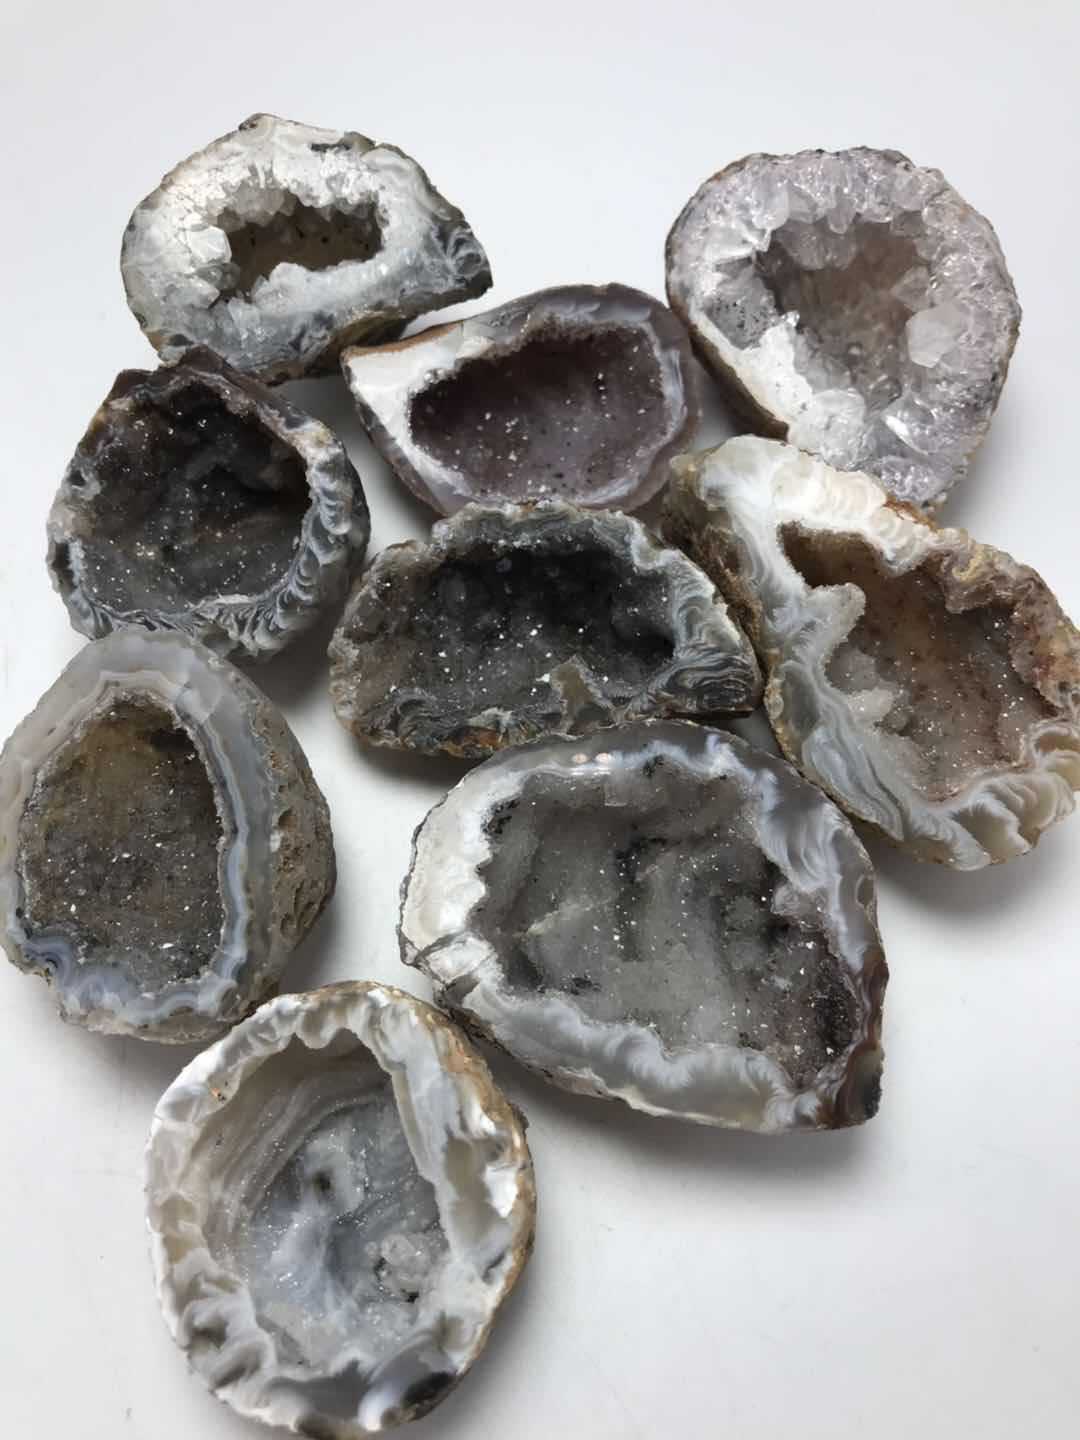 1pcs/2pcs Natural Agate Geode Crystal Box For Home Decoration Reiki Healing Mineral Specimen Collection